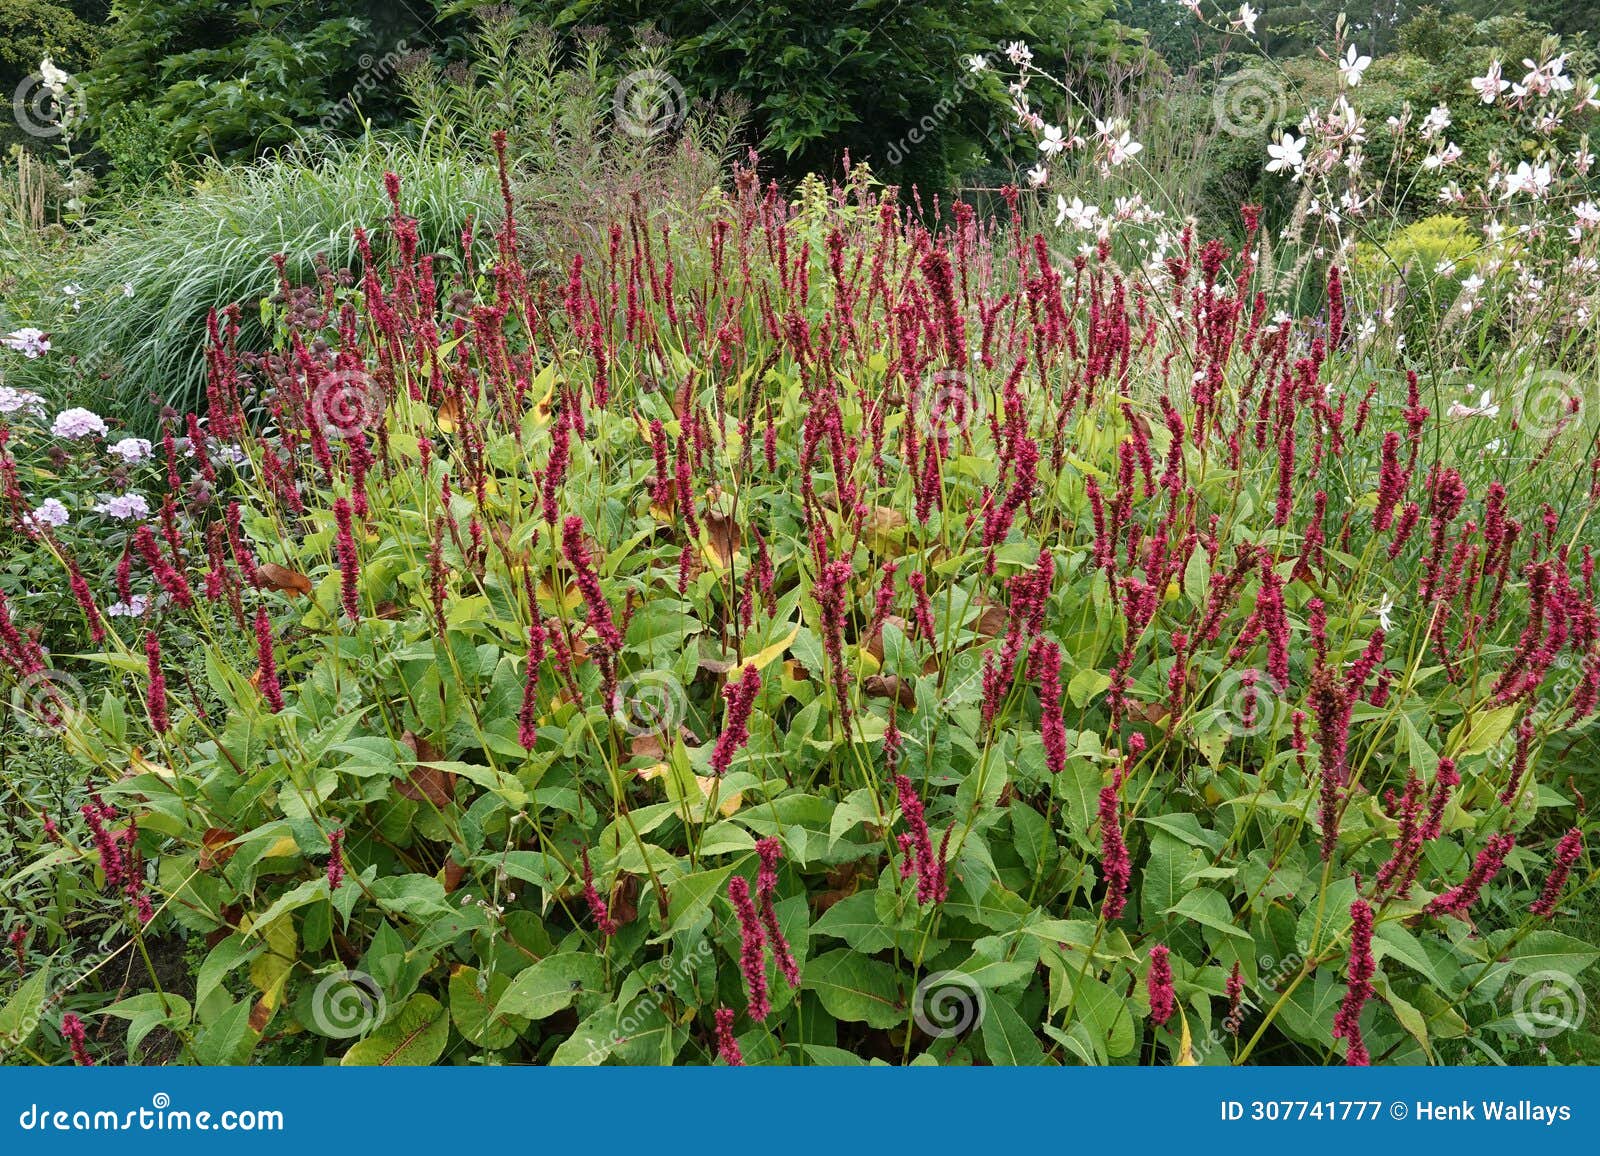 colorful closeup on an aggregatrion of red bistrot plants, persicaria amplexicaulis, in the garden